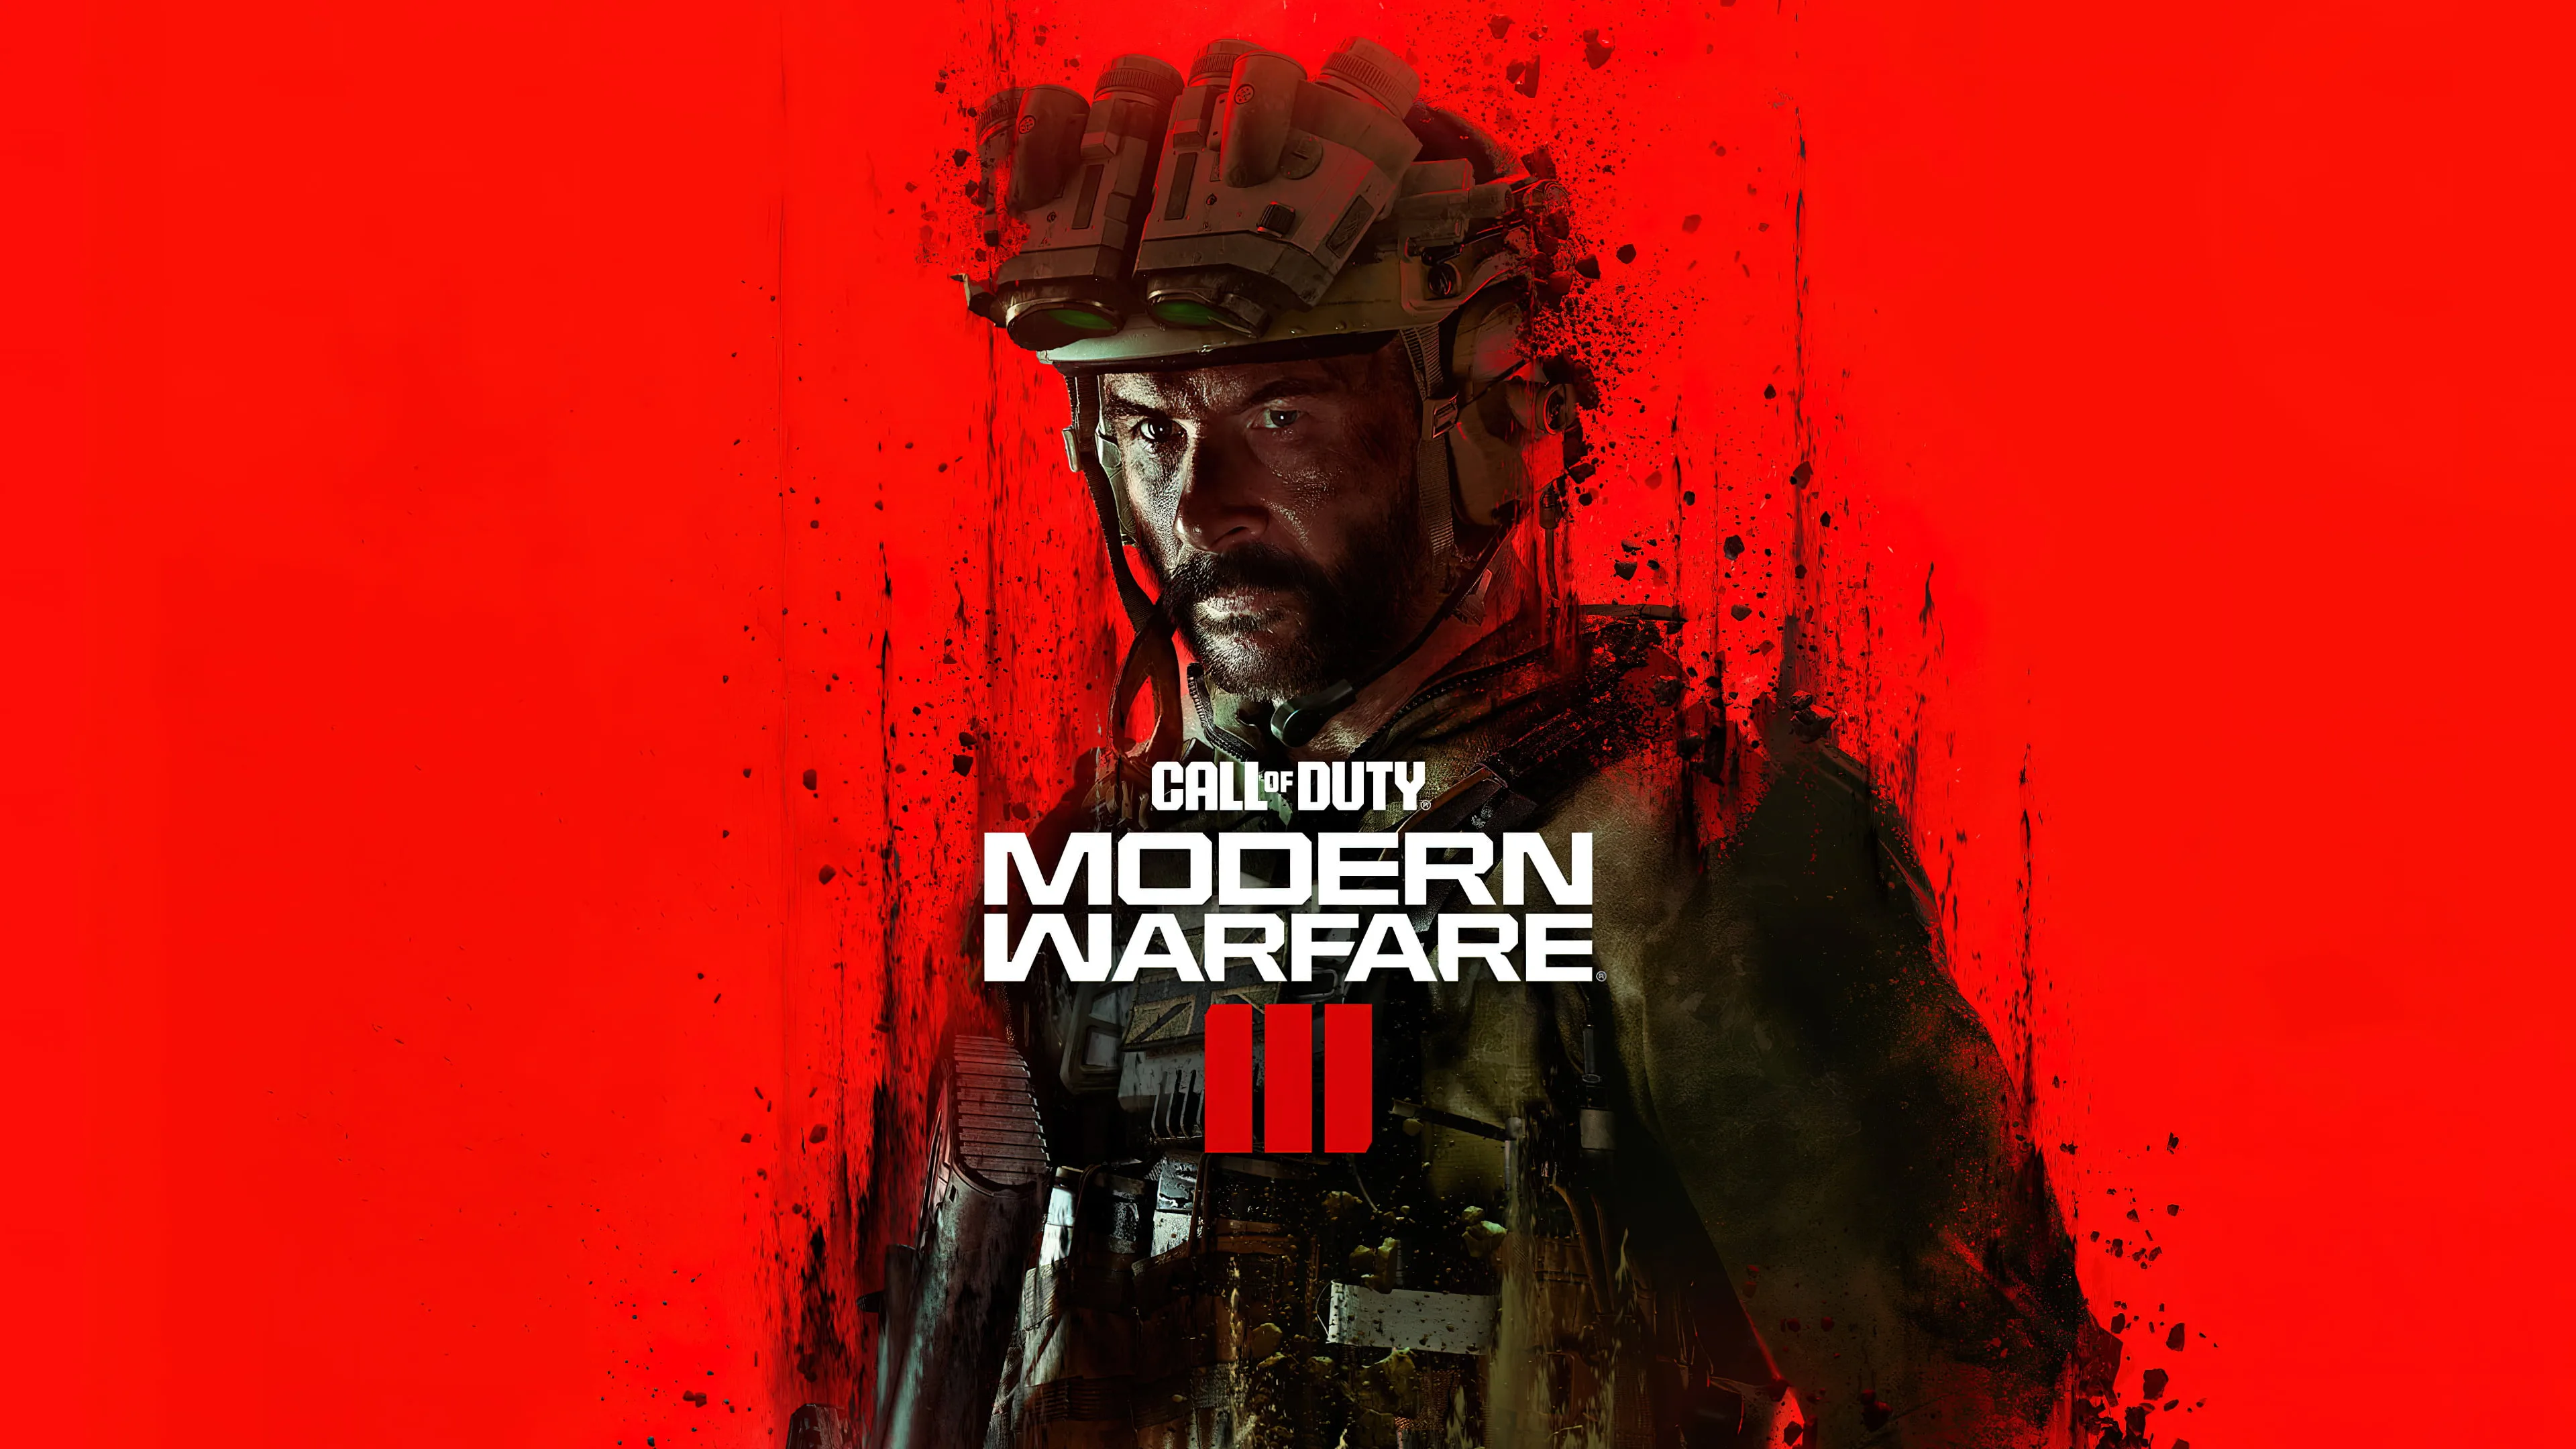 5 Cod for, cod pc HD wallpaper, wallpaper 4k para pc call of duty -  thirstymag.com